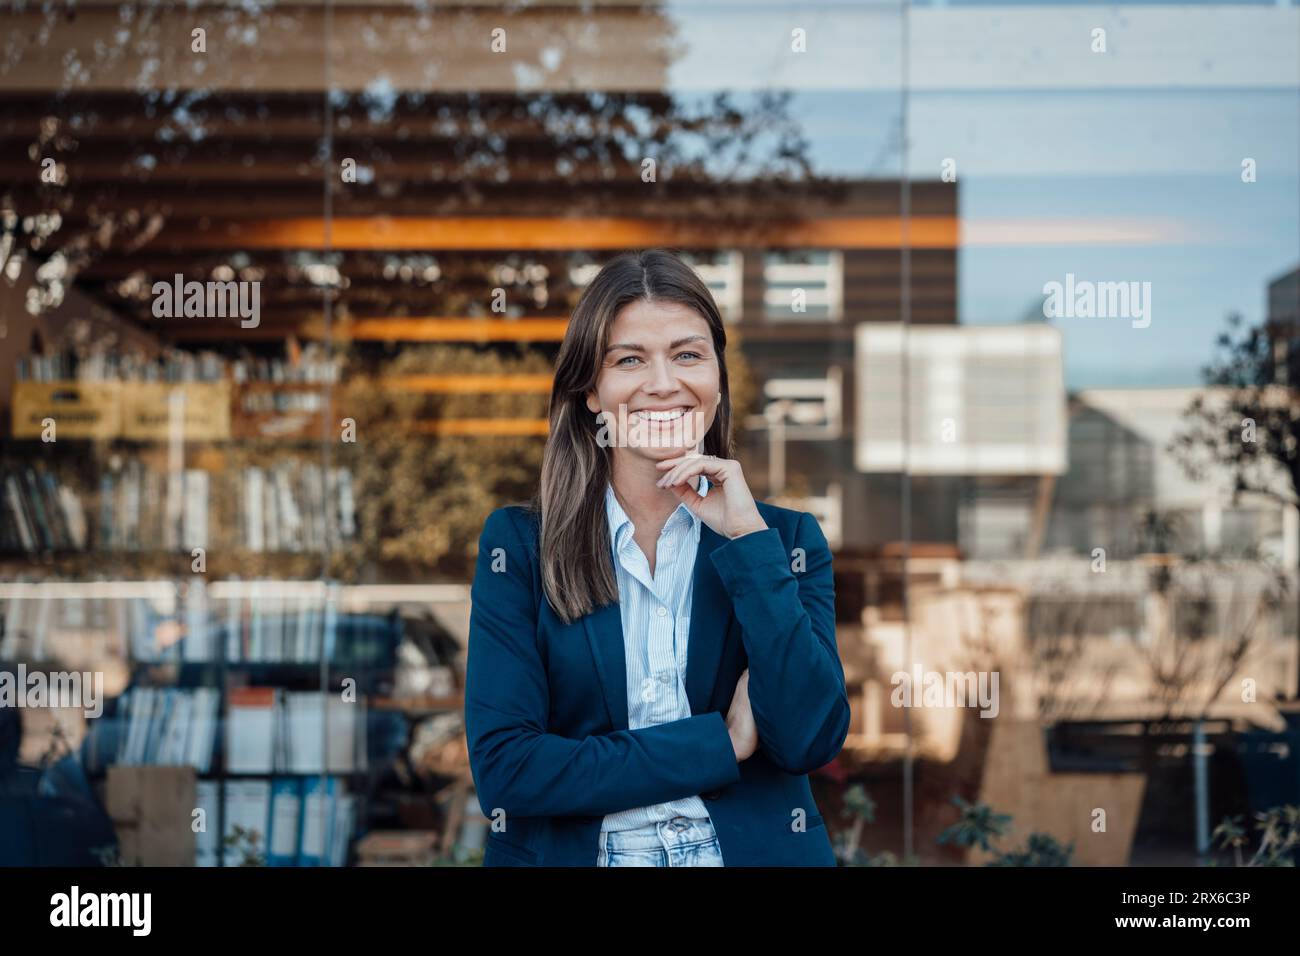 Smiling businesswoman wearing blazer standing in front of glass Stock Photo